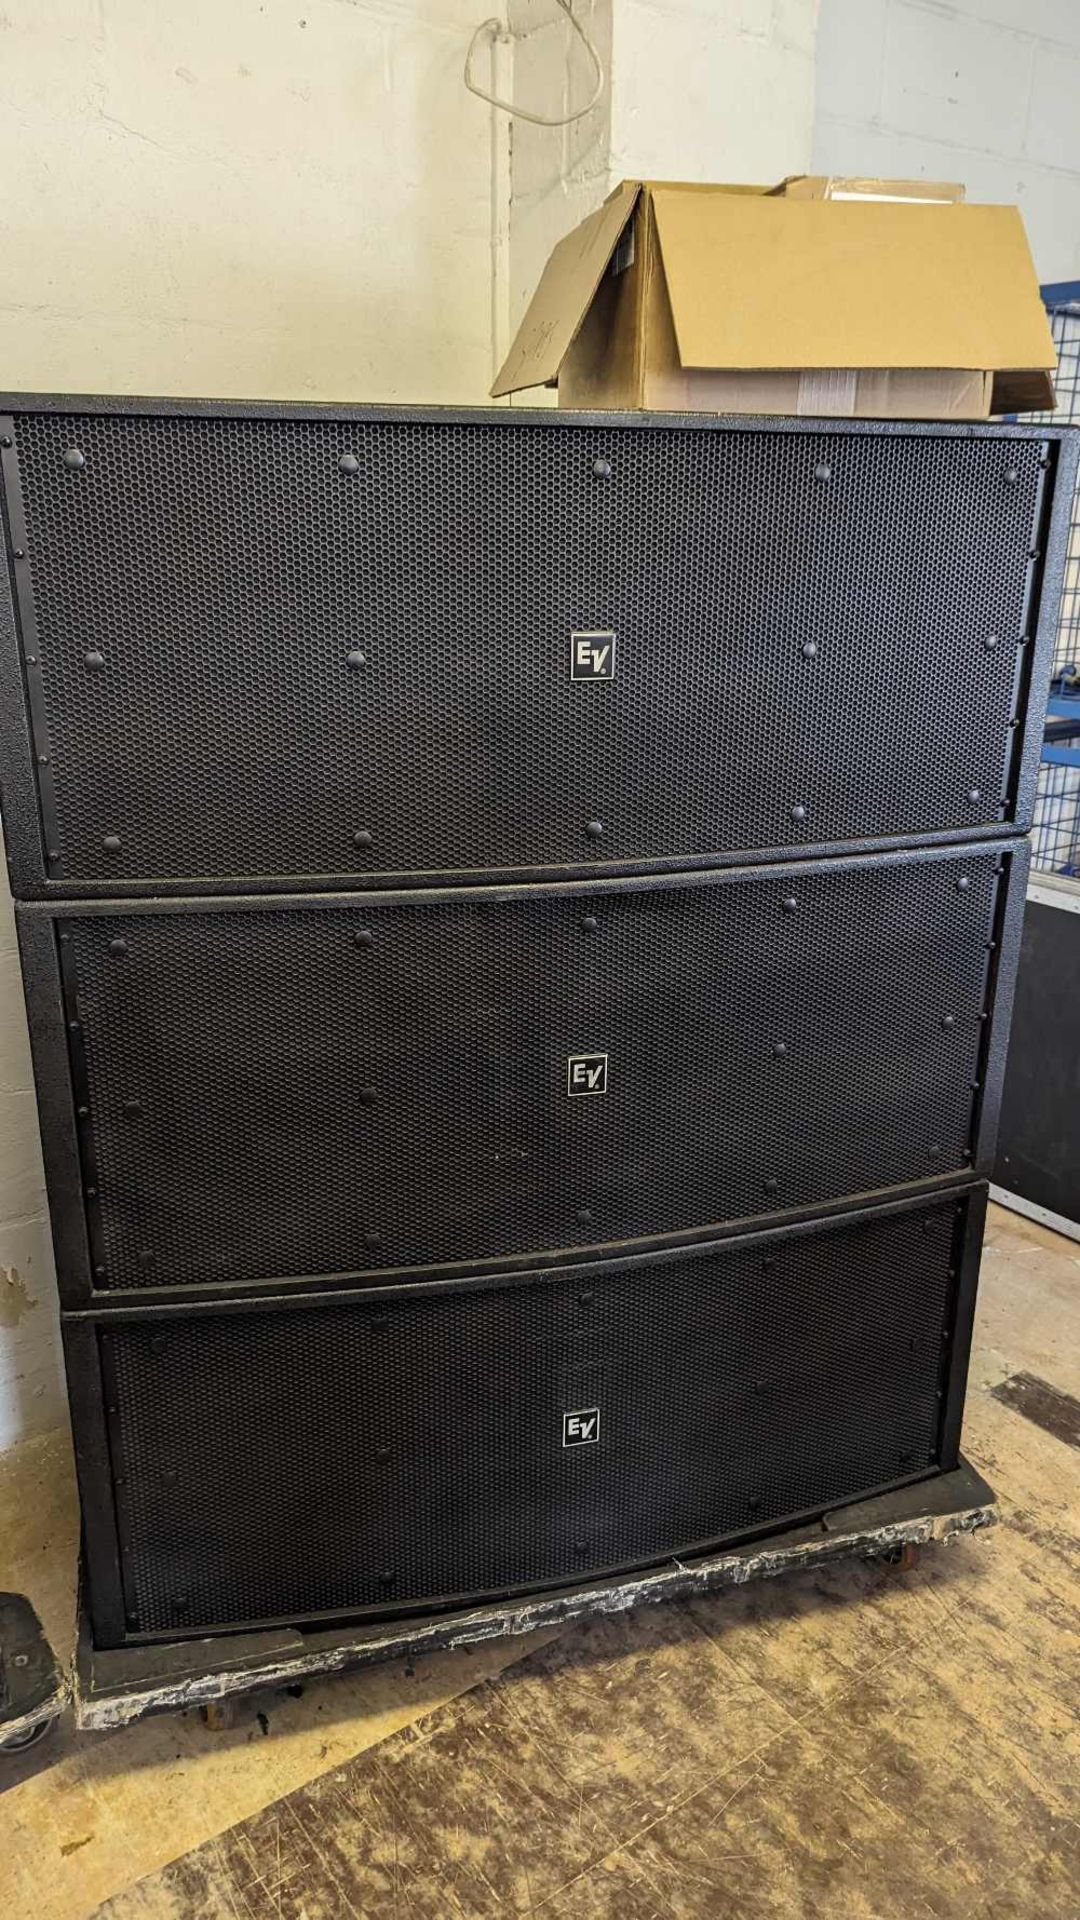 Electro-Voice PA Sound System - (12) XLC127 DVX Speakers, (6) X-Line Subs & Associated Equipment - Image 6 of 27